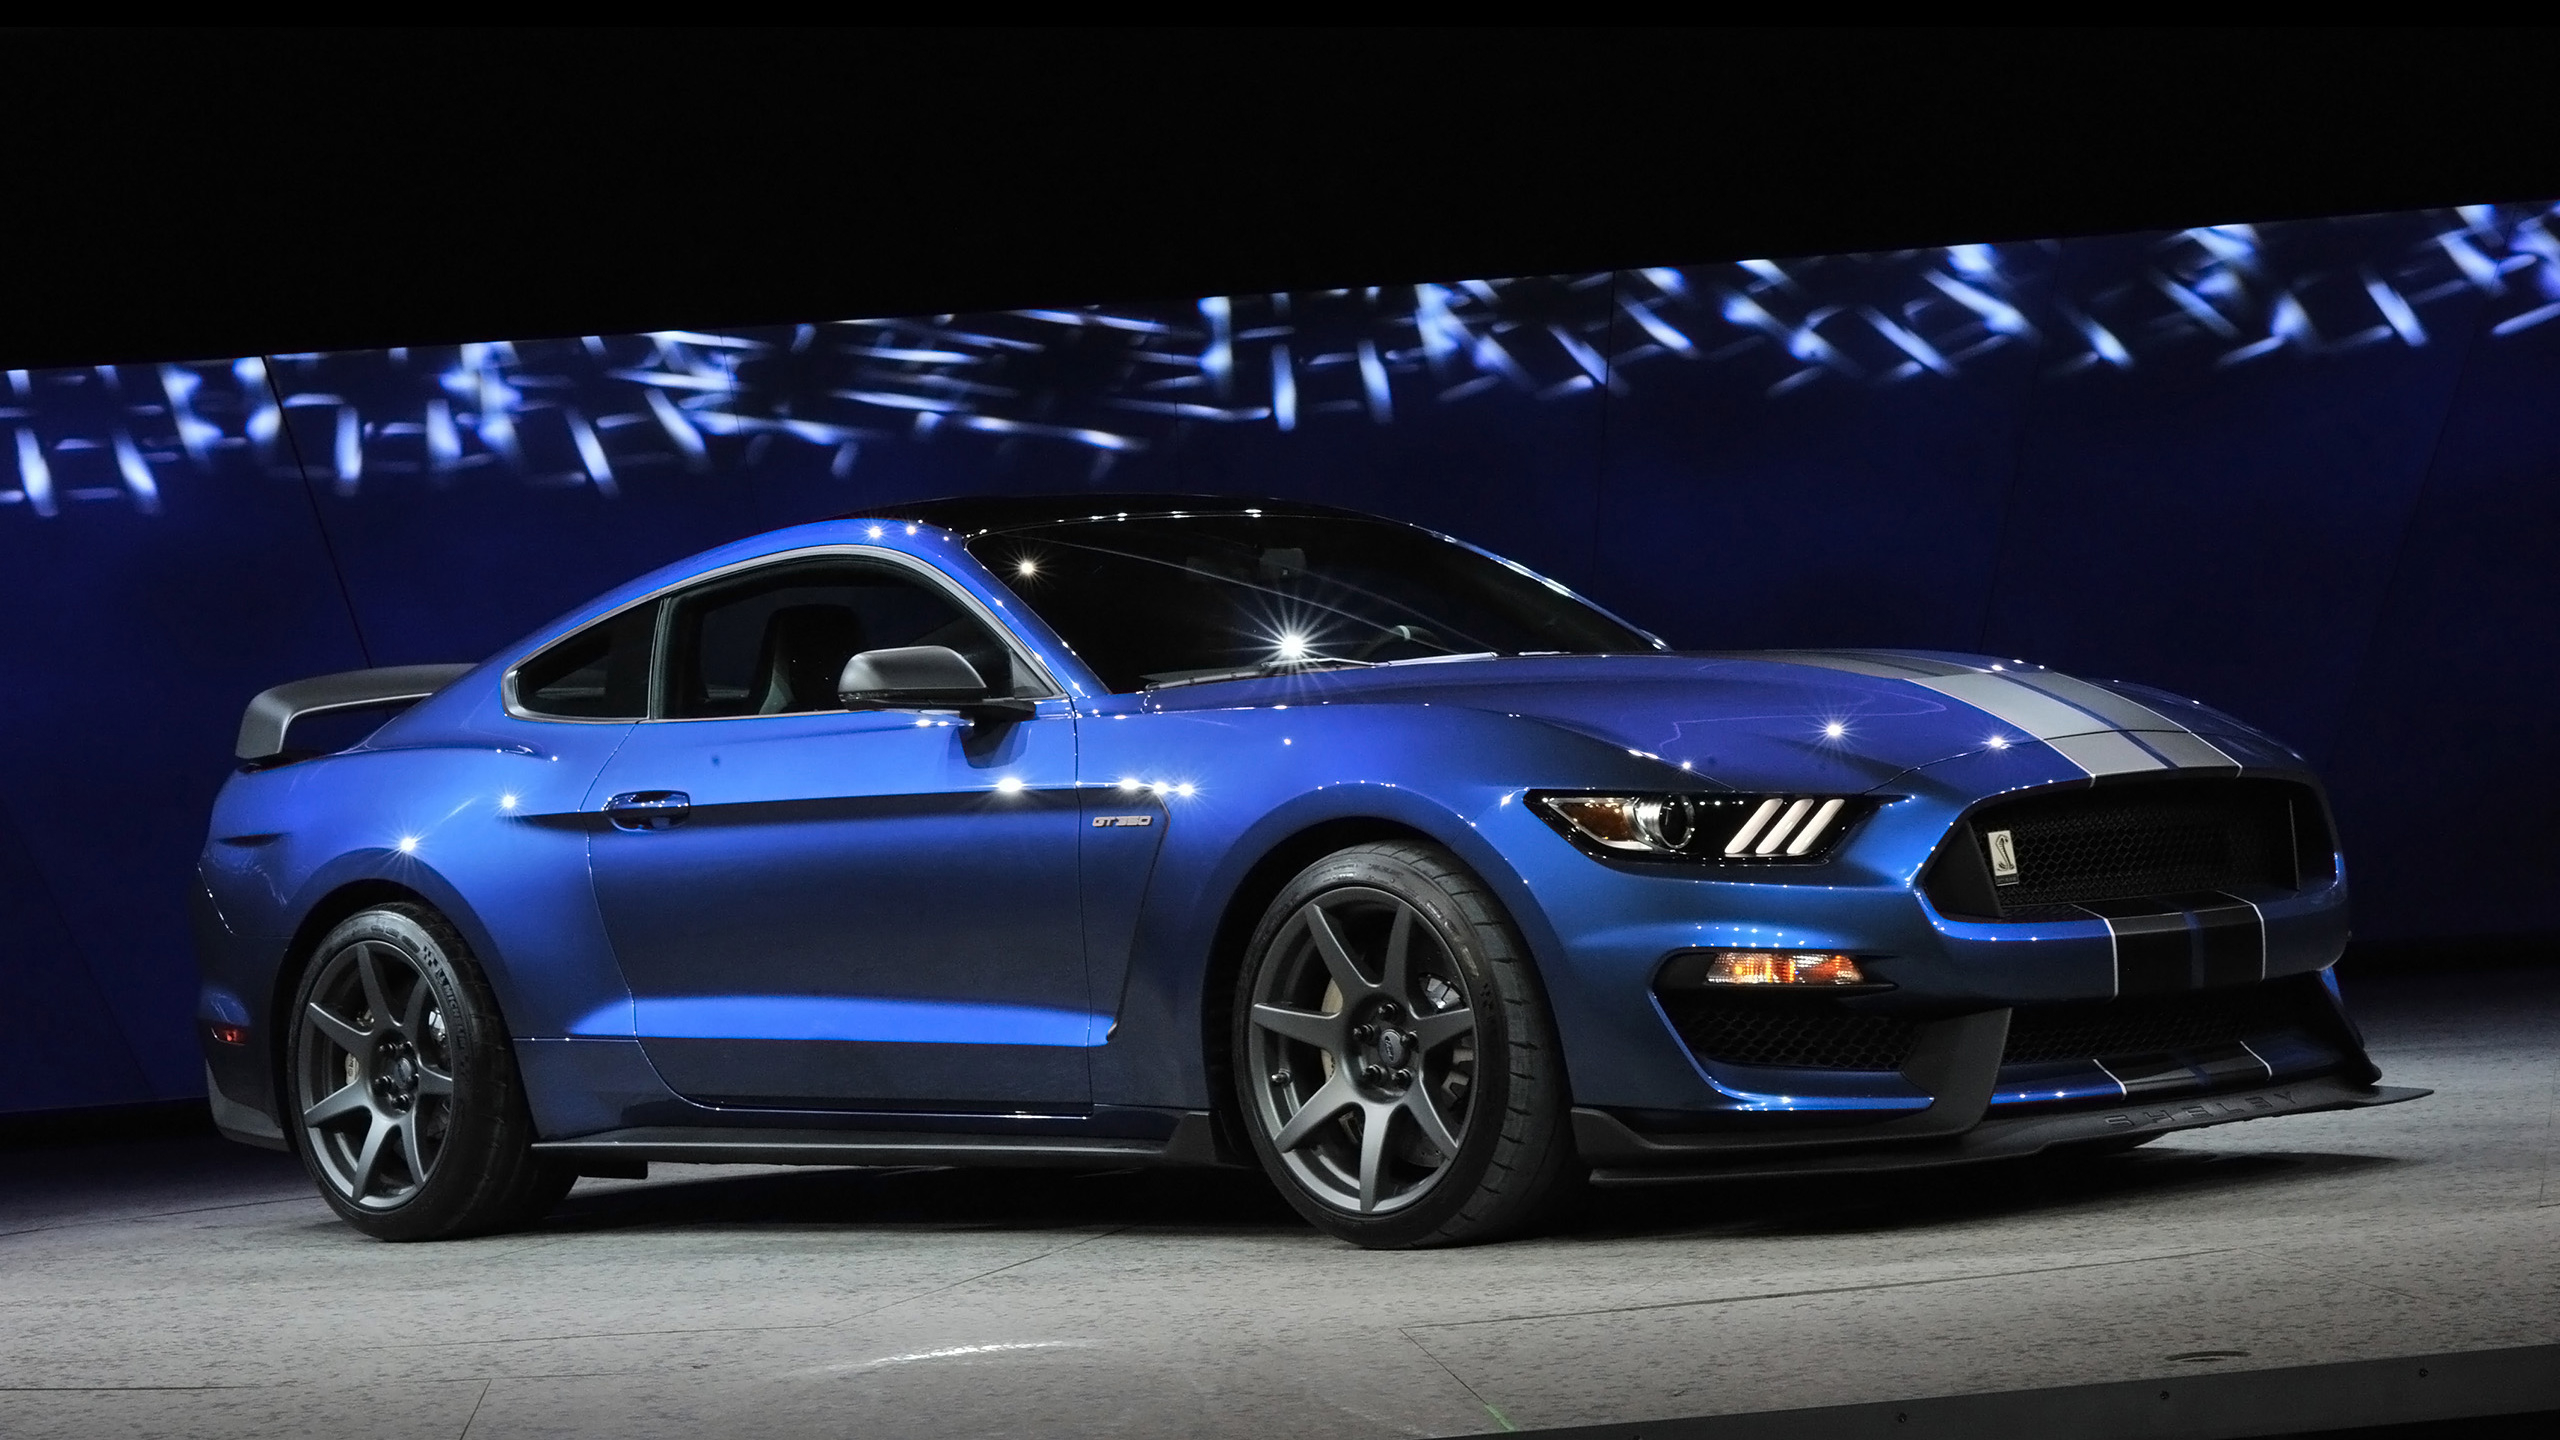 2560x1440 Free download 2016 Ford Shelby GT350R Mustang 2 Wallpaper [] for your Desktop, Mobile \u0026 Tablet | Explore 39+ 2017 Mustang GT350 Wallpaper | 2017 Mustang GT350 Wallpaper, Mustang GT350 Wallpaper, 2016 Mustang GT350 Wallpaper